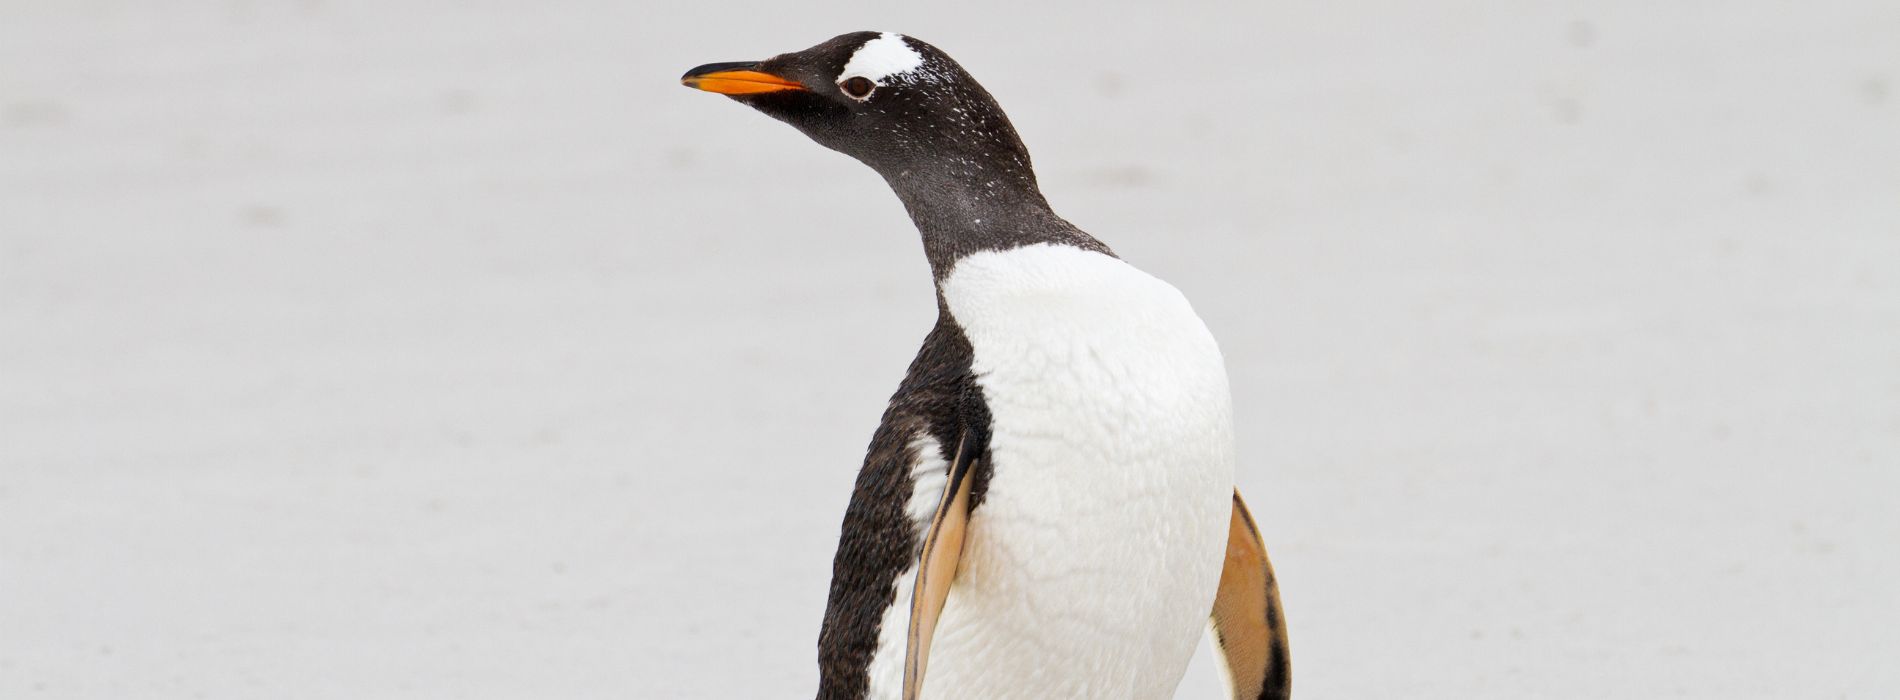 Are penguins smart?